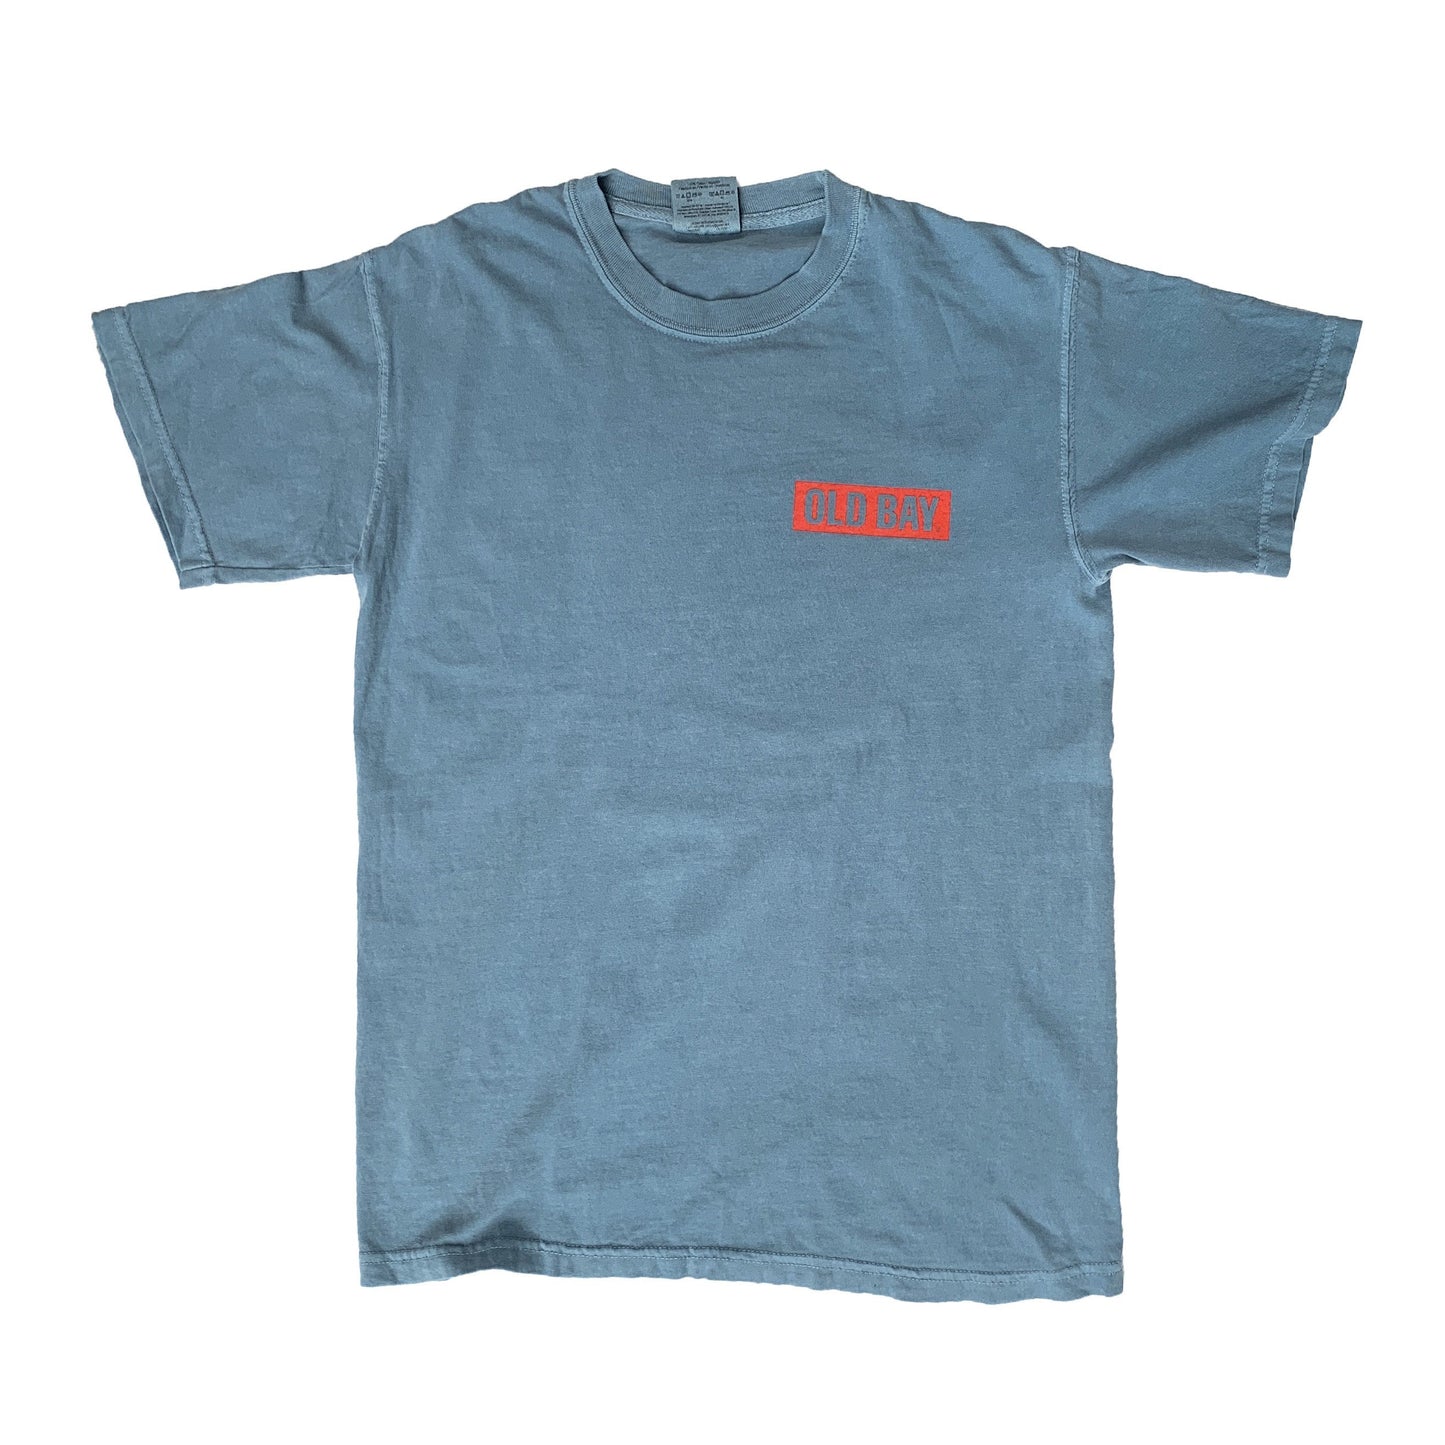 It's BAYginning to Look A Lot Like Christmas (Ice Blue) / Shirt - Route One Apparel